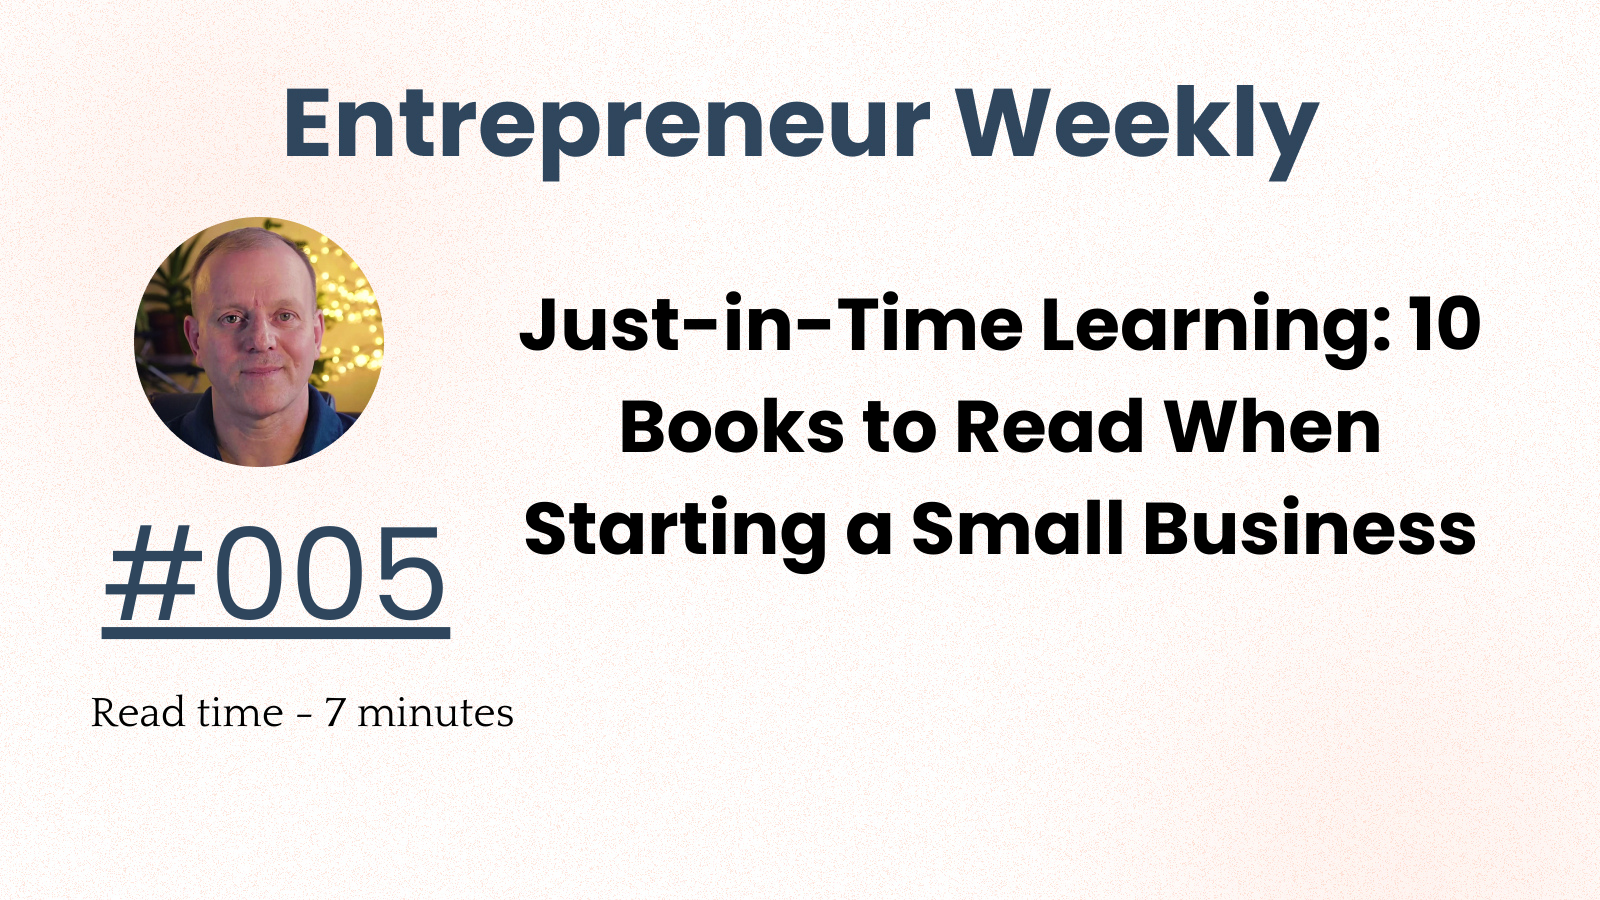 Just-in-Time Learning: 10 Books to Read When Starting a Small Business